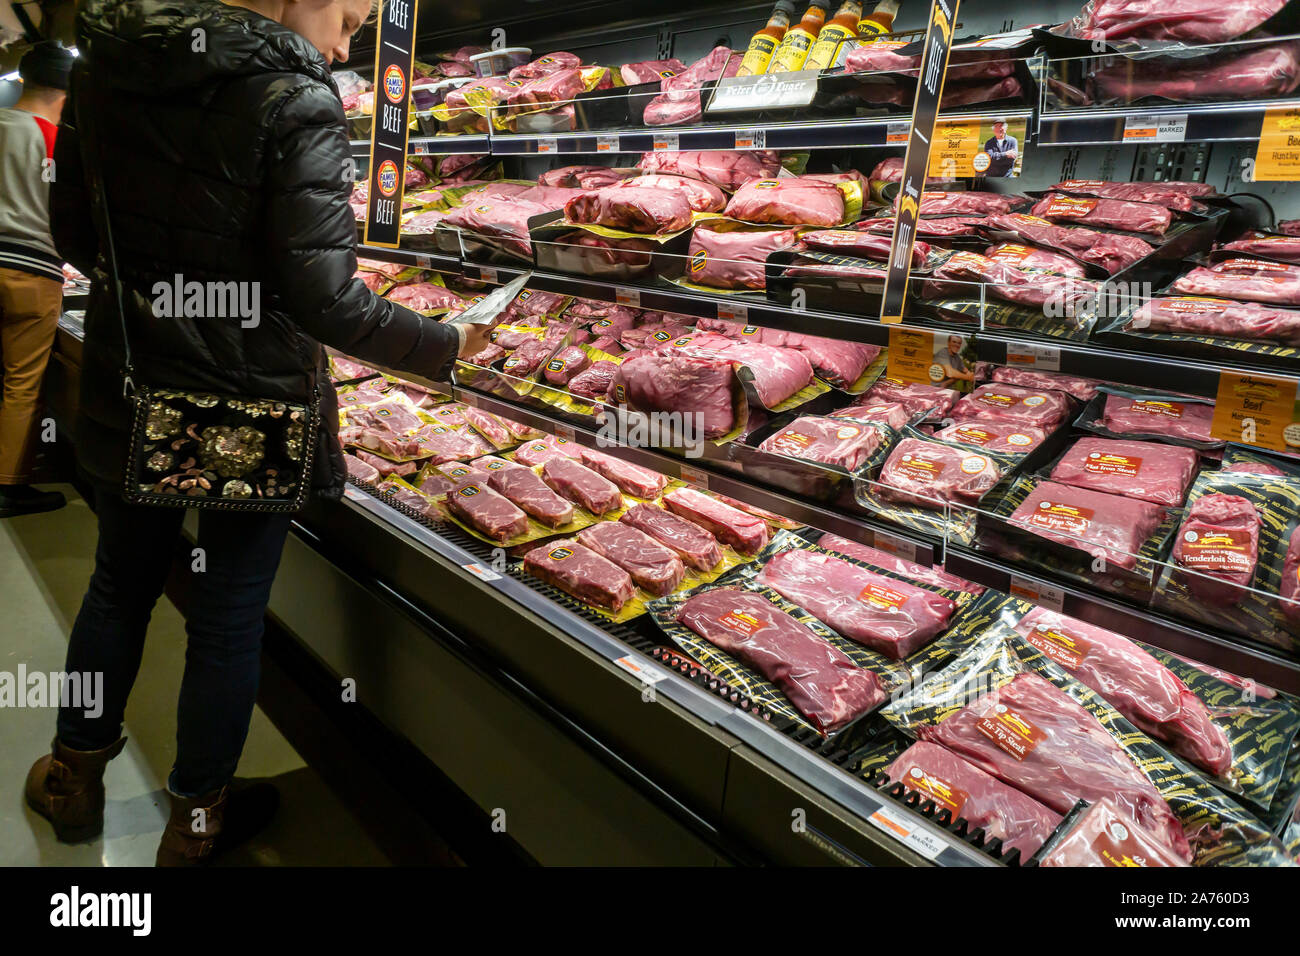 Thousands of excited shoppers flock to the Wegmans supermarket in Brooklyn in New York on its grand opening day, Sunday, October 27, 2019.  The chain, which has a cult-like following, opened its first store in New York City in the Brooklyn Navy Yard. The 74,000 square foot store is the 103 year old company’s 101st store and provided almost 600 jobs. (© Richard B. Levine) Stock Photo